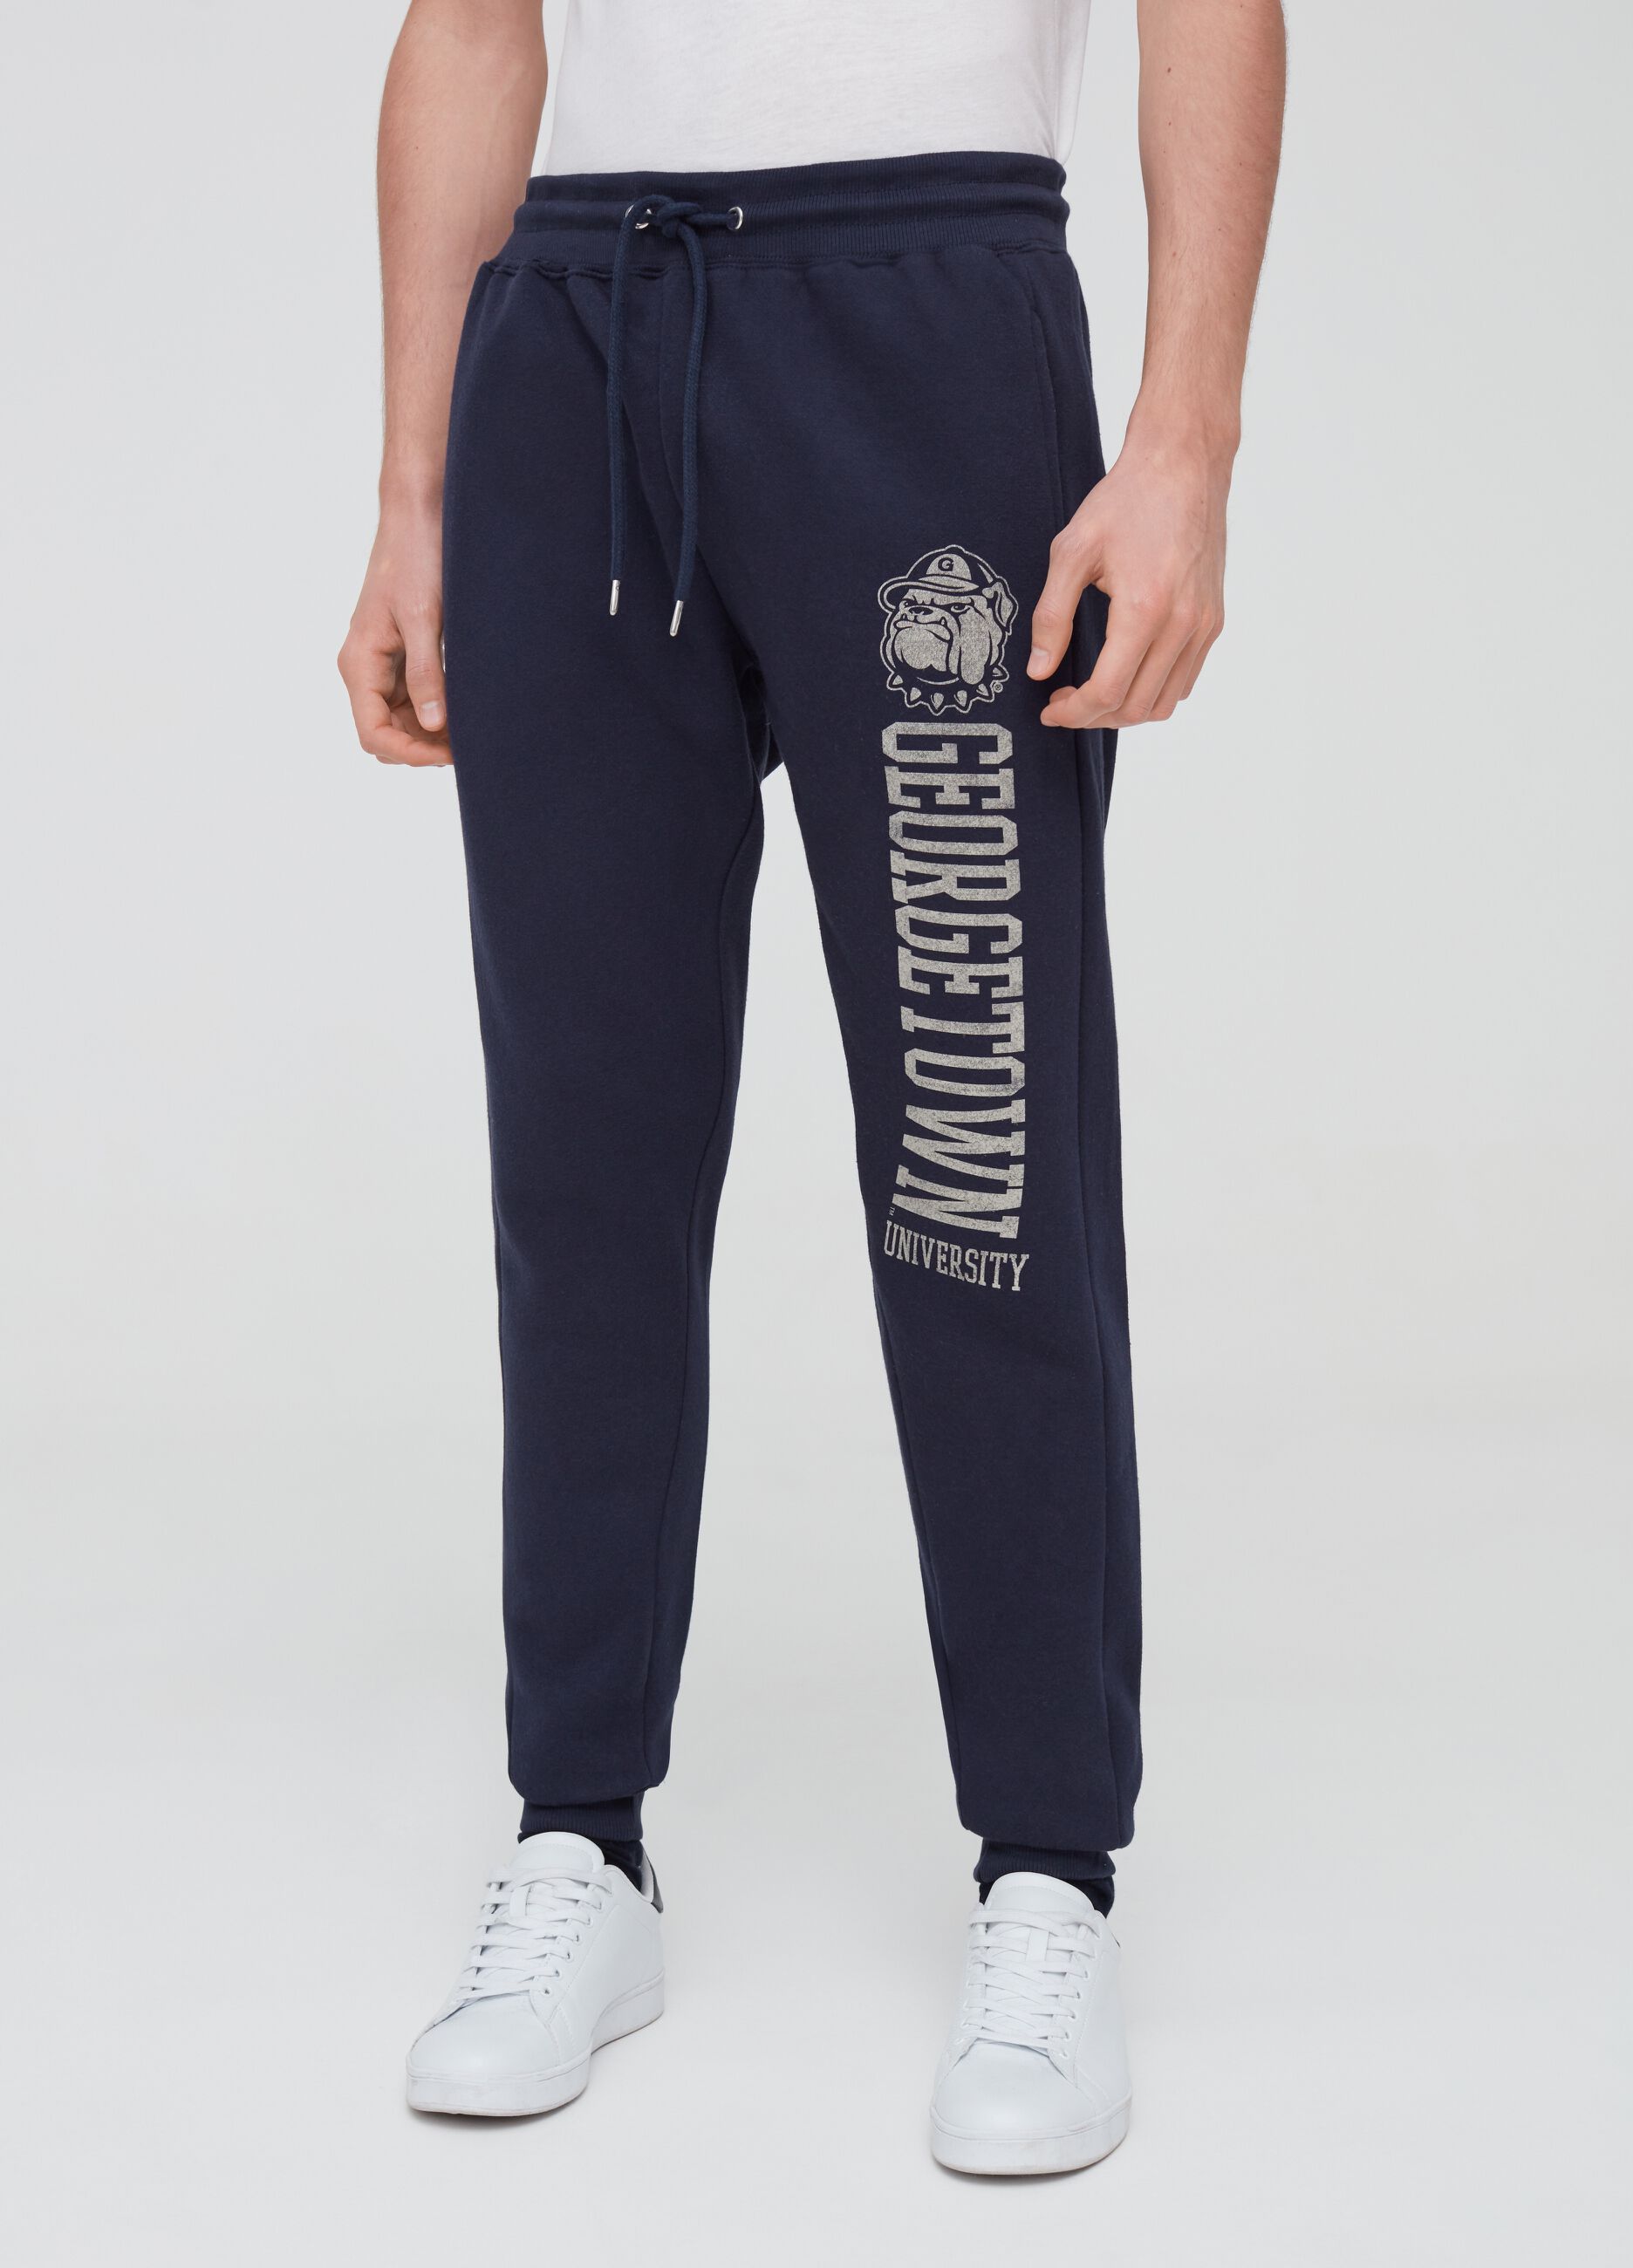 Solid colour joggers with print